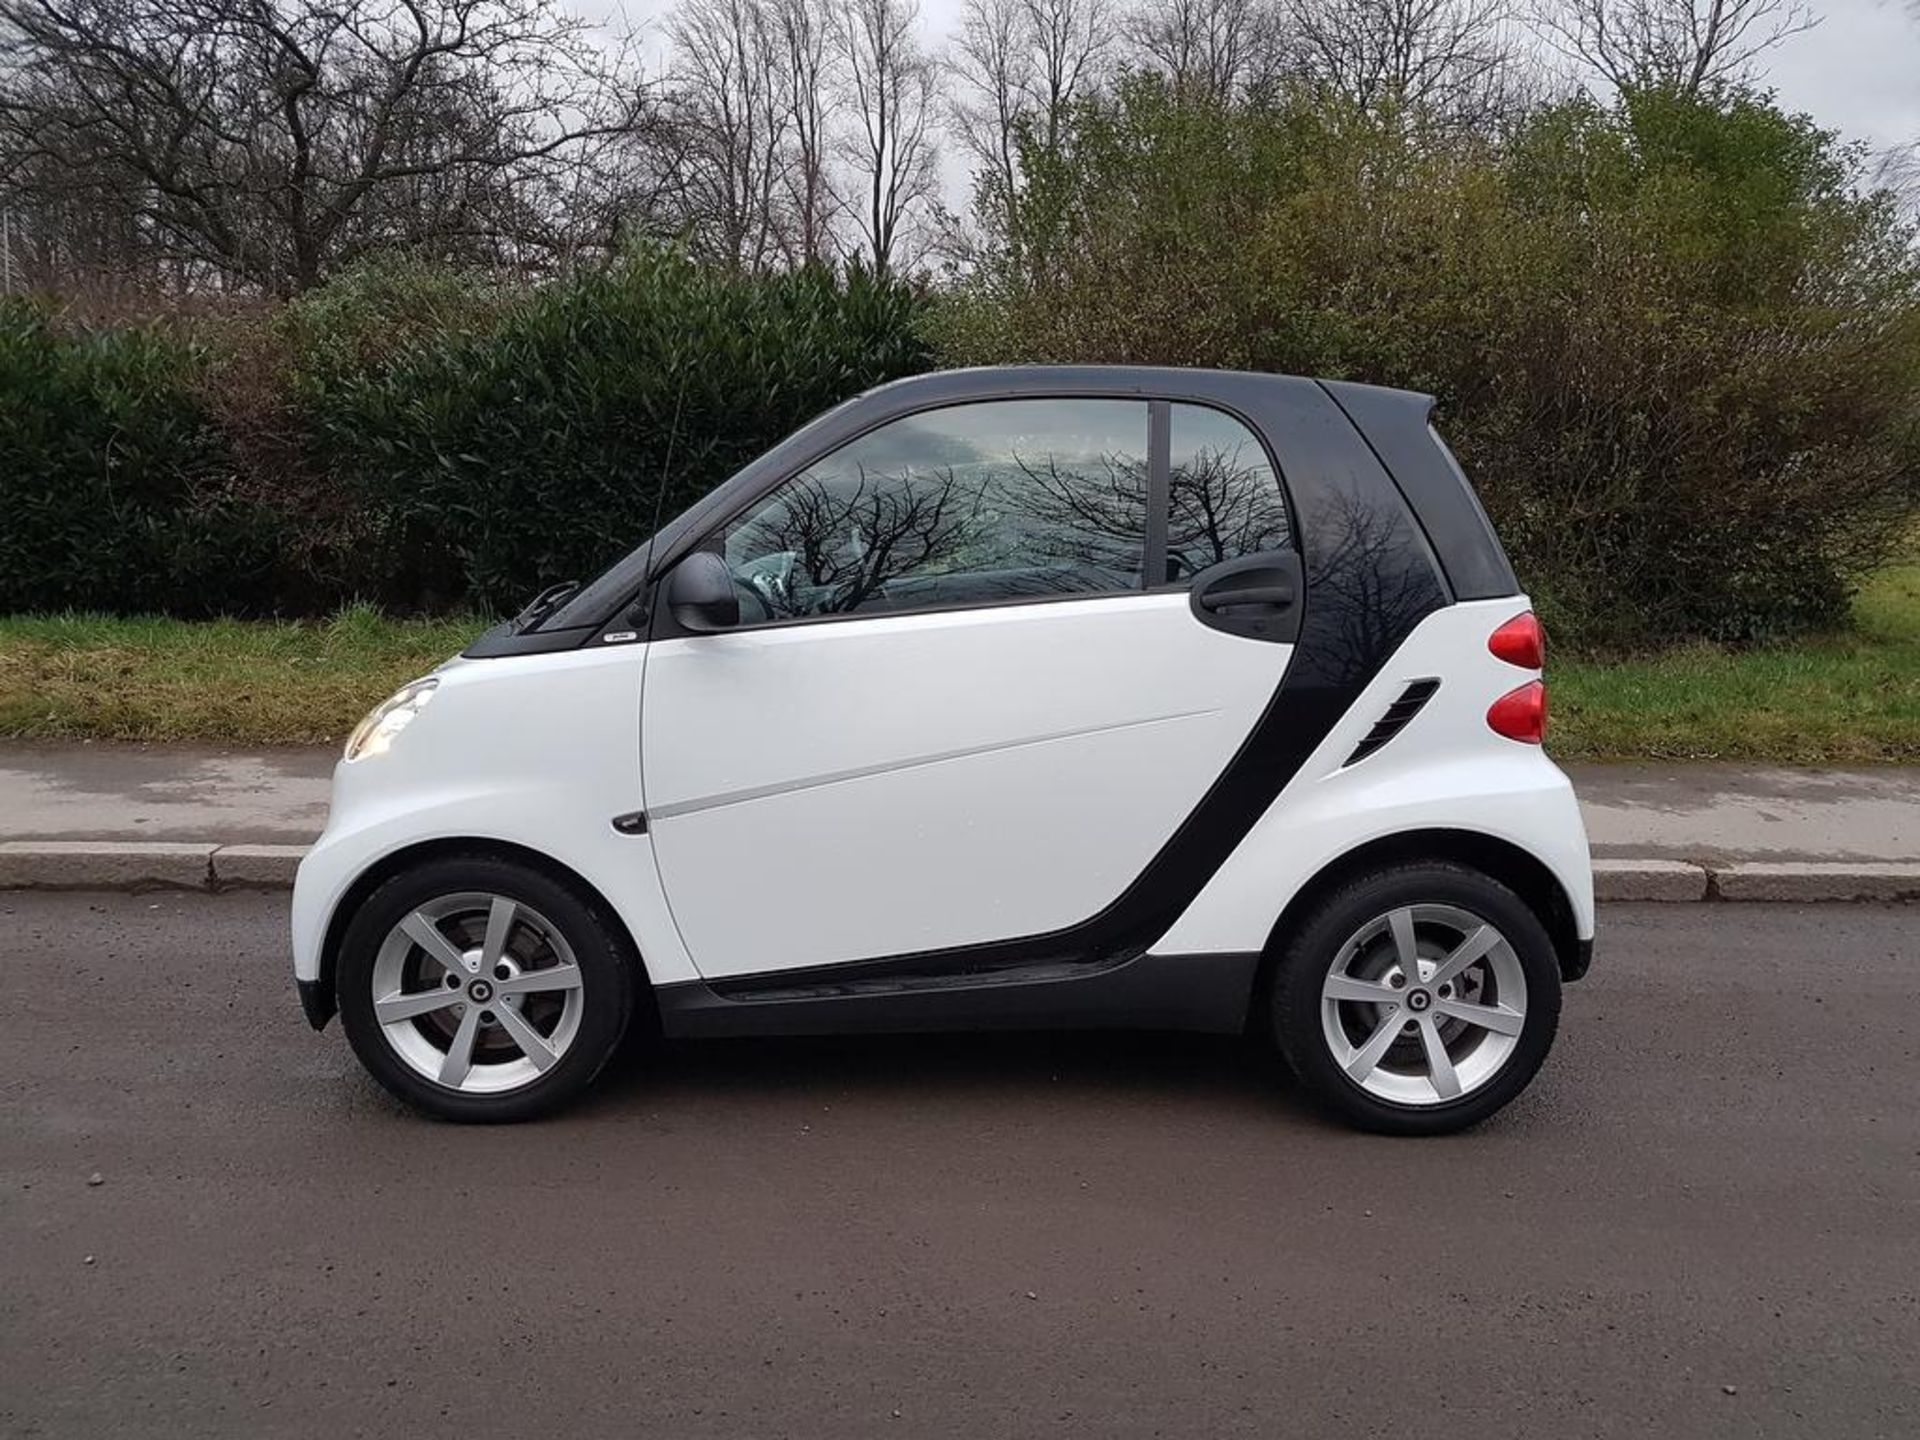 SMART, PULSE, DK59 XRL, 1-0 LTR, PETROL, AUTOMATIC, 2009, 2 DOOR HATCH, CURRENT RECORDED MILEAGE - Image 13 of 13